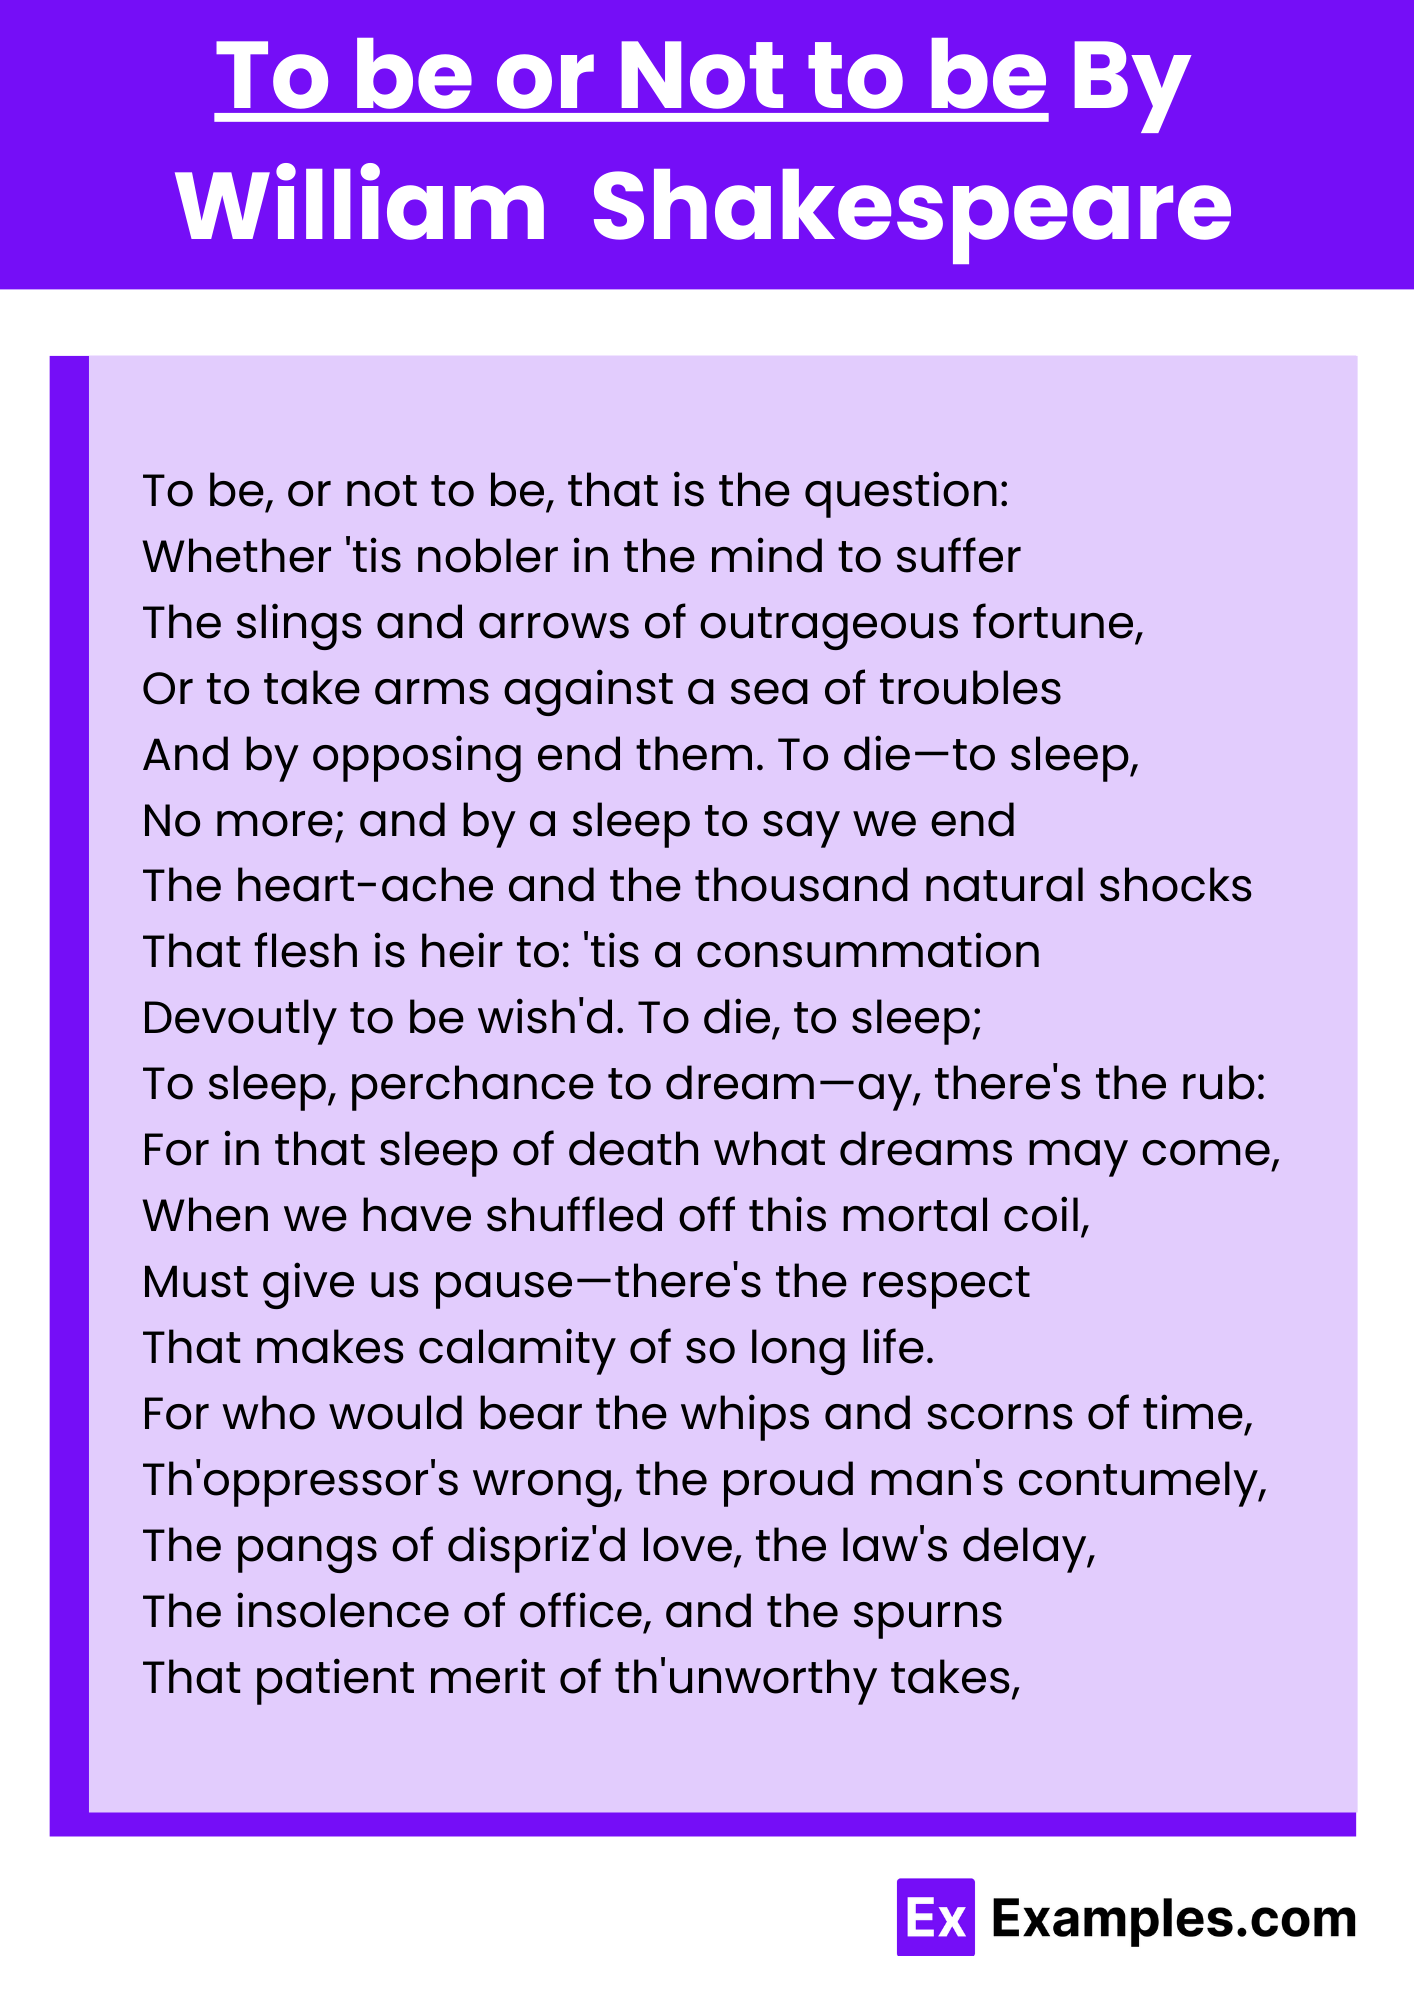 To be or Not to be By William Shakespeare